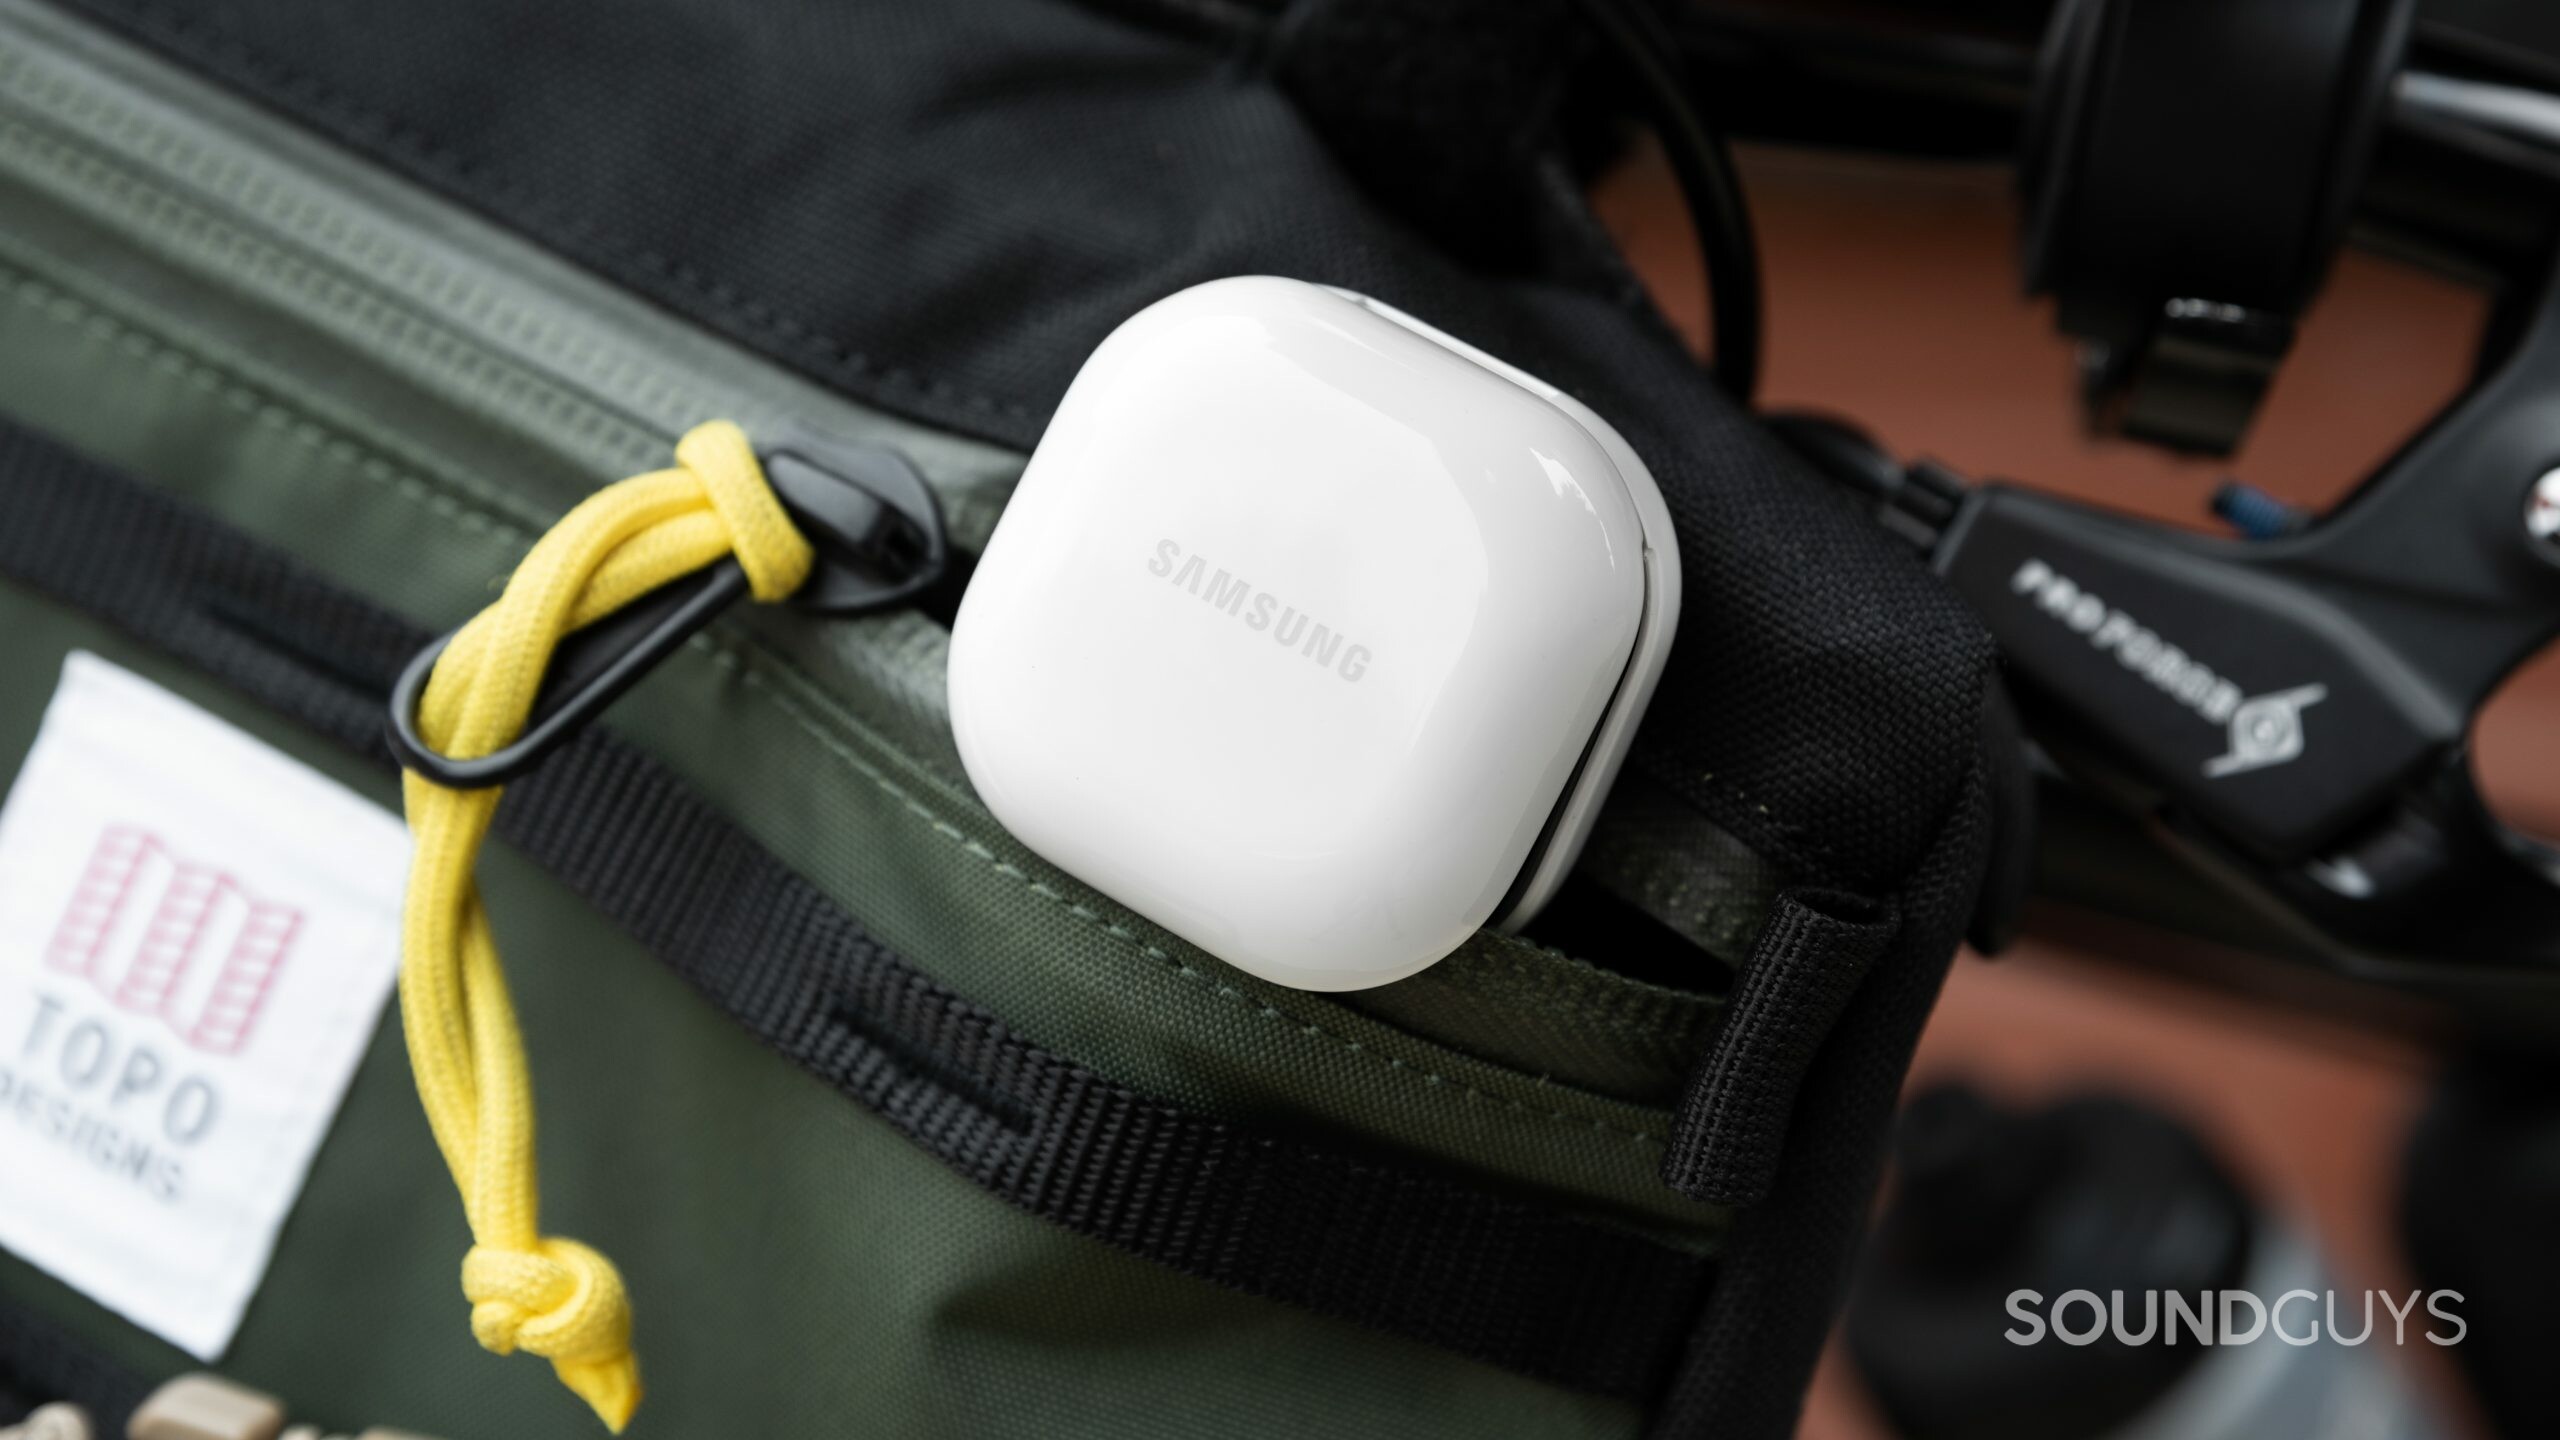 The Samsung Galaxy Buds 2 noise canceling true wireless earbuds case partway in a zippered bag.